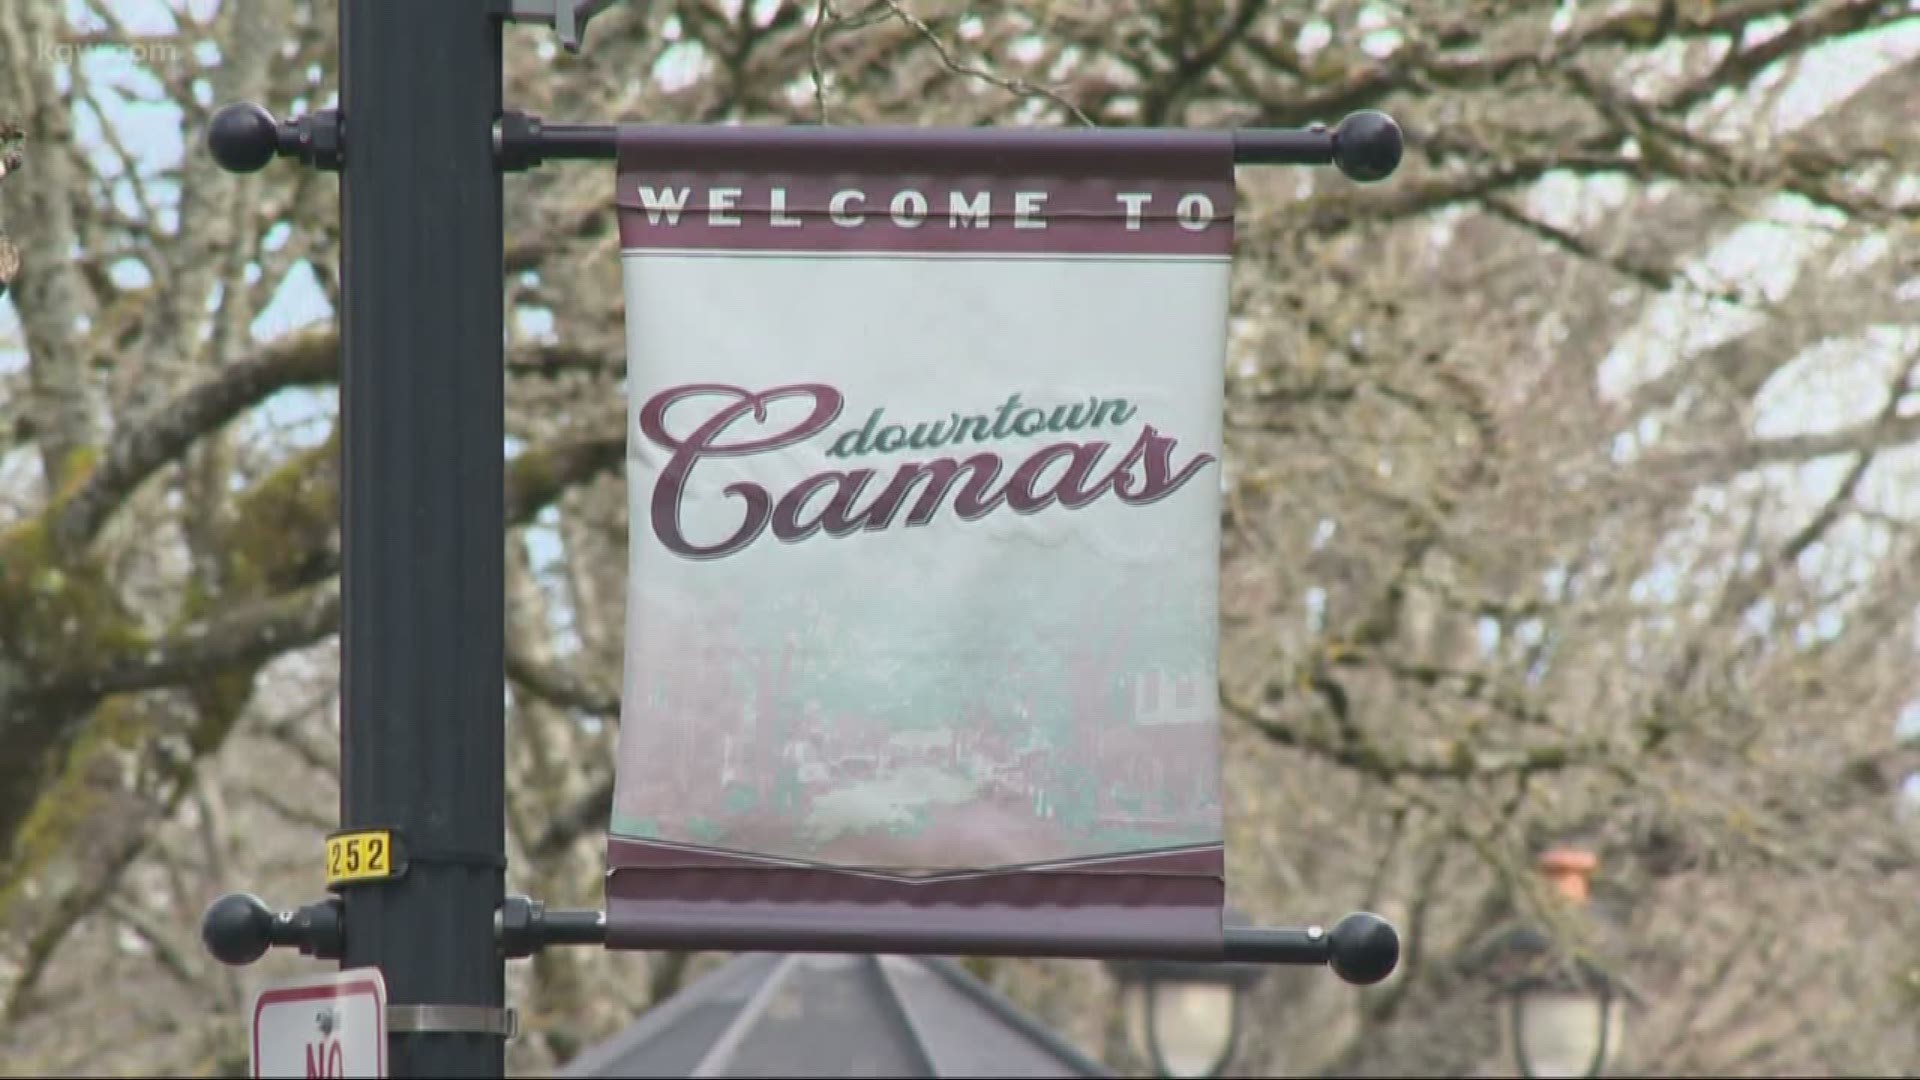 Rod on the road: Visiting Camas